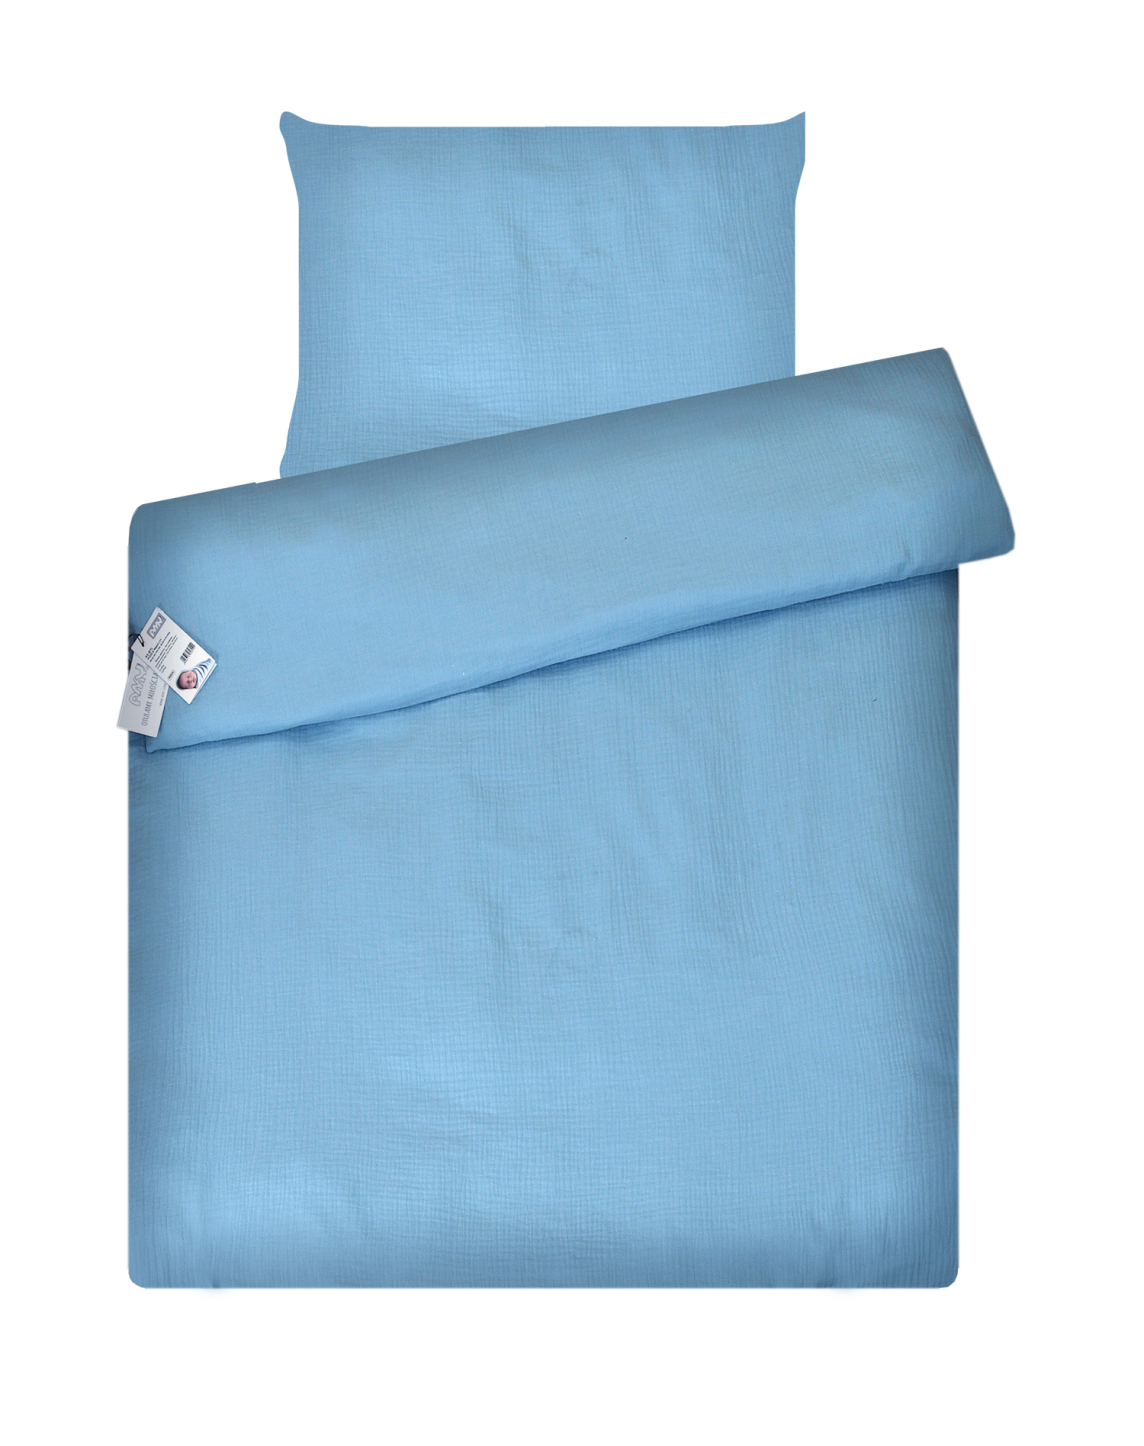 2-element bedding set for Amy MUSLIN BLUE PUZZLE